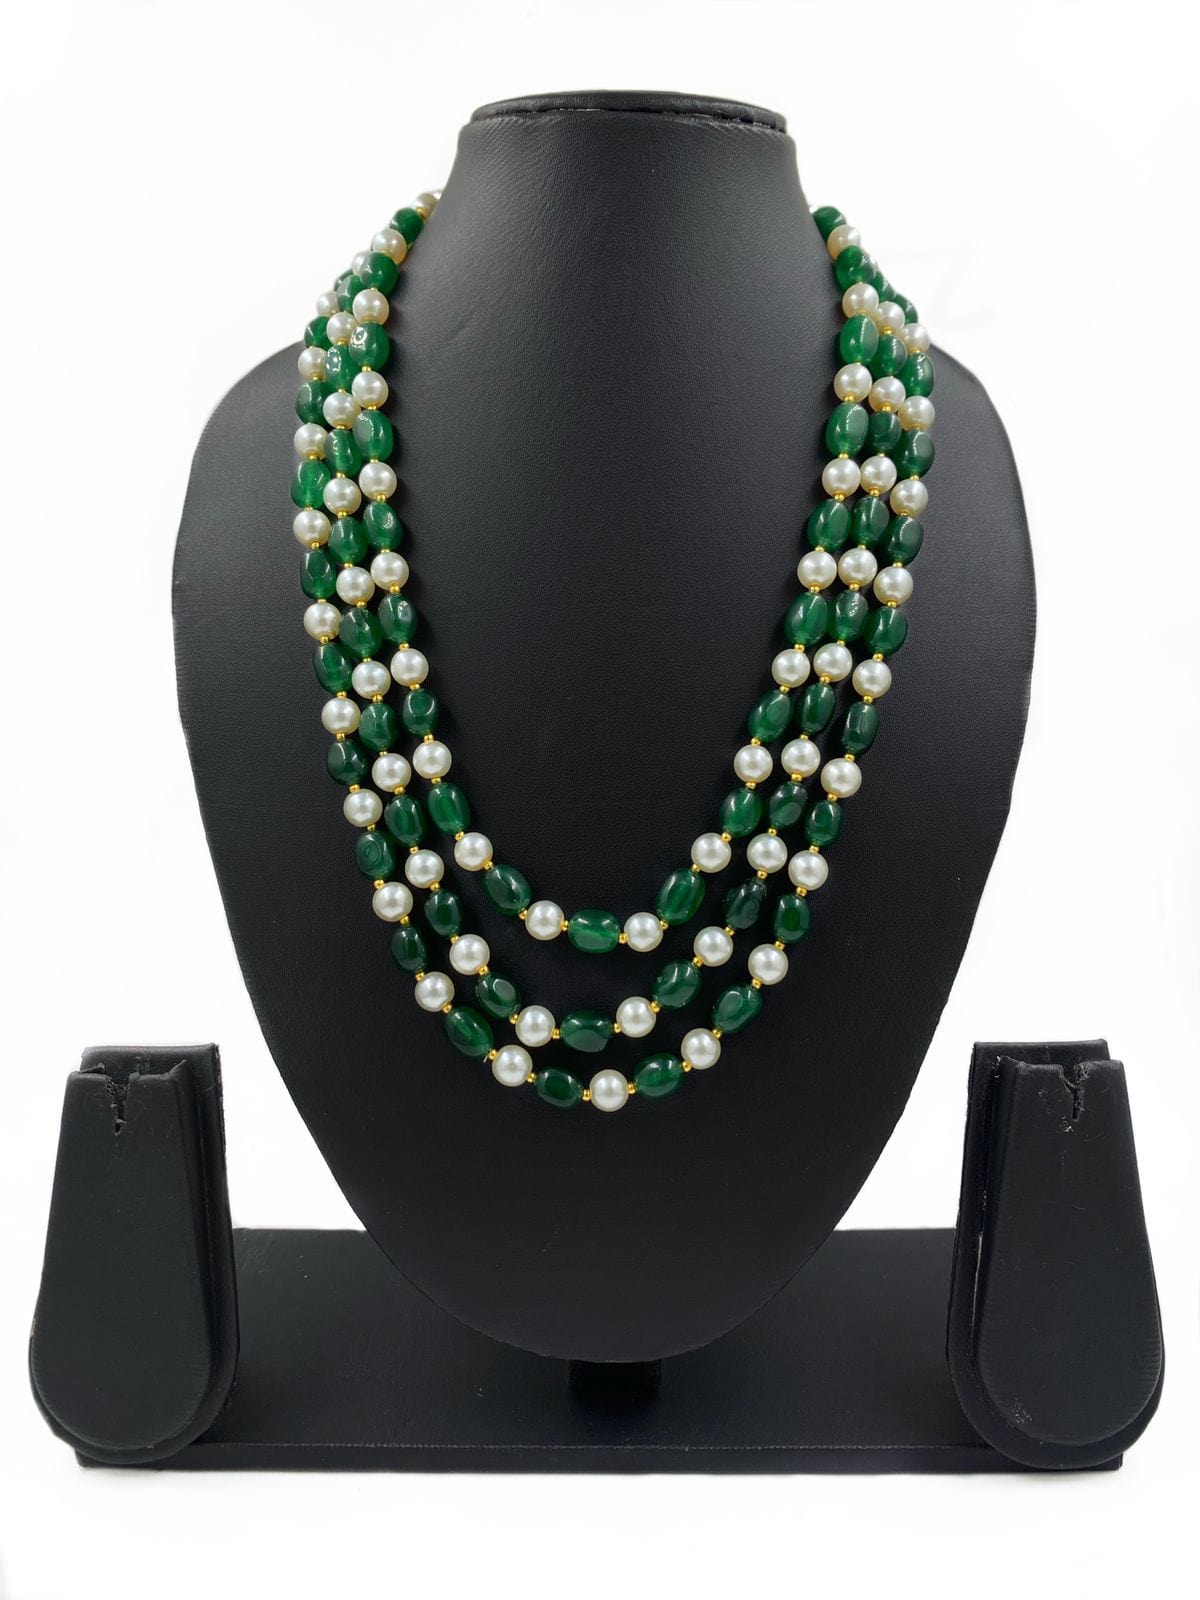 Multilayered Semi Precious Green Jade And Pearls Beads Necklace By Gehna Shop Beads Jewellery